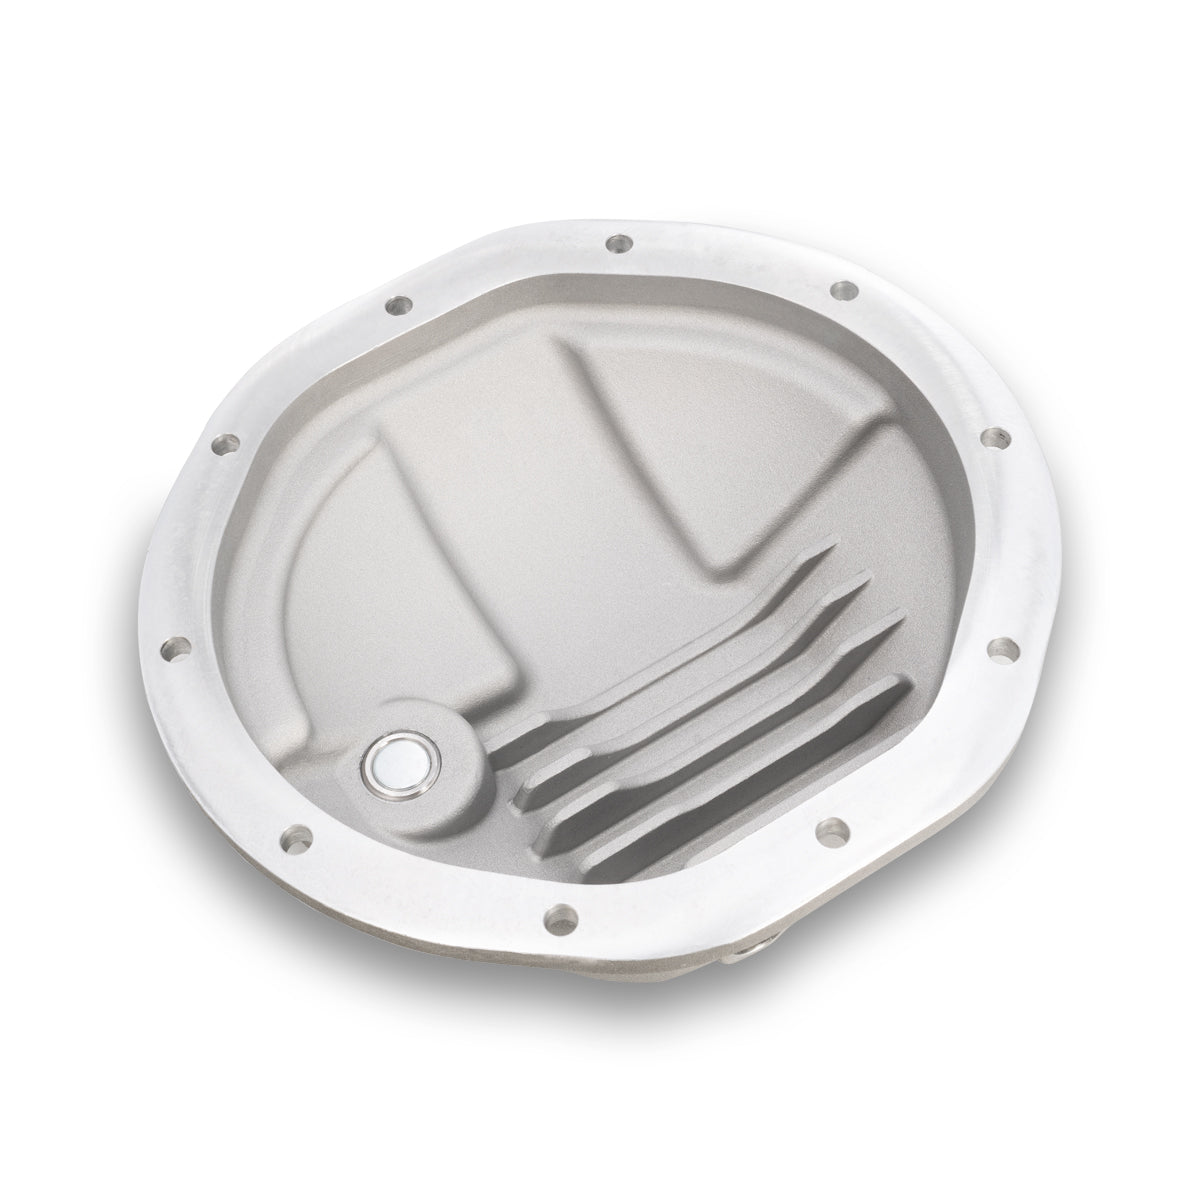 PPE Diesel 1972-2013 GM K1500 8.5 Inch -10 Heavy-Duty Aluminum Rear Differential Cover Brushed 138051310